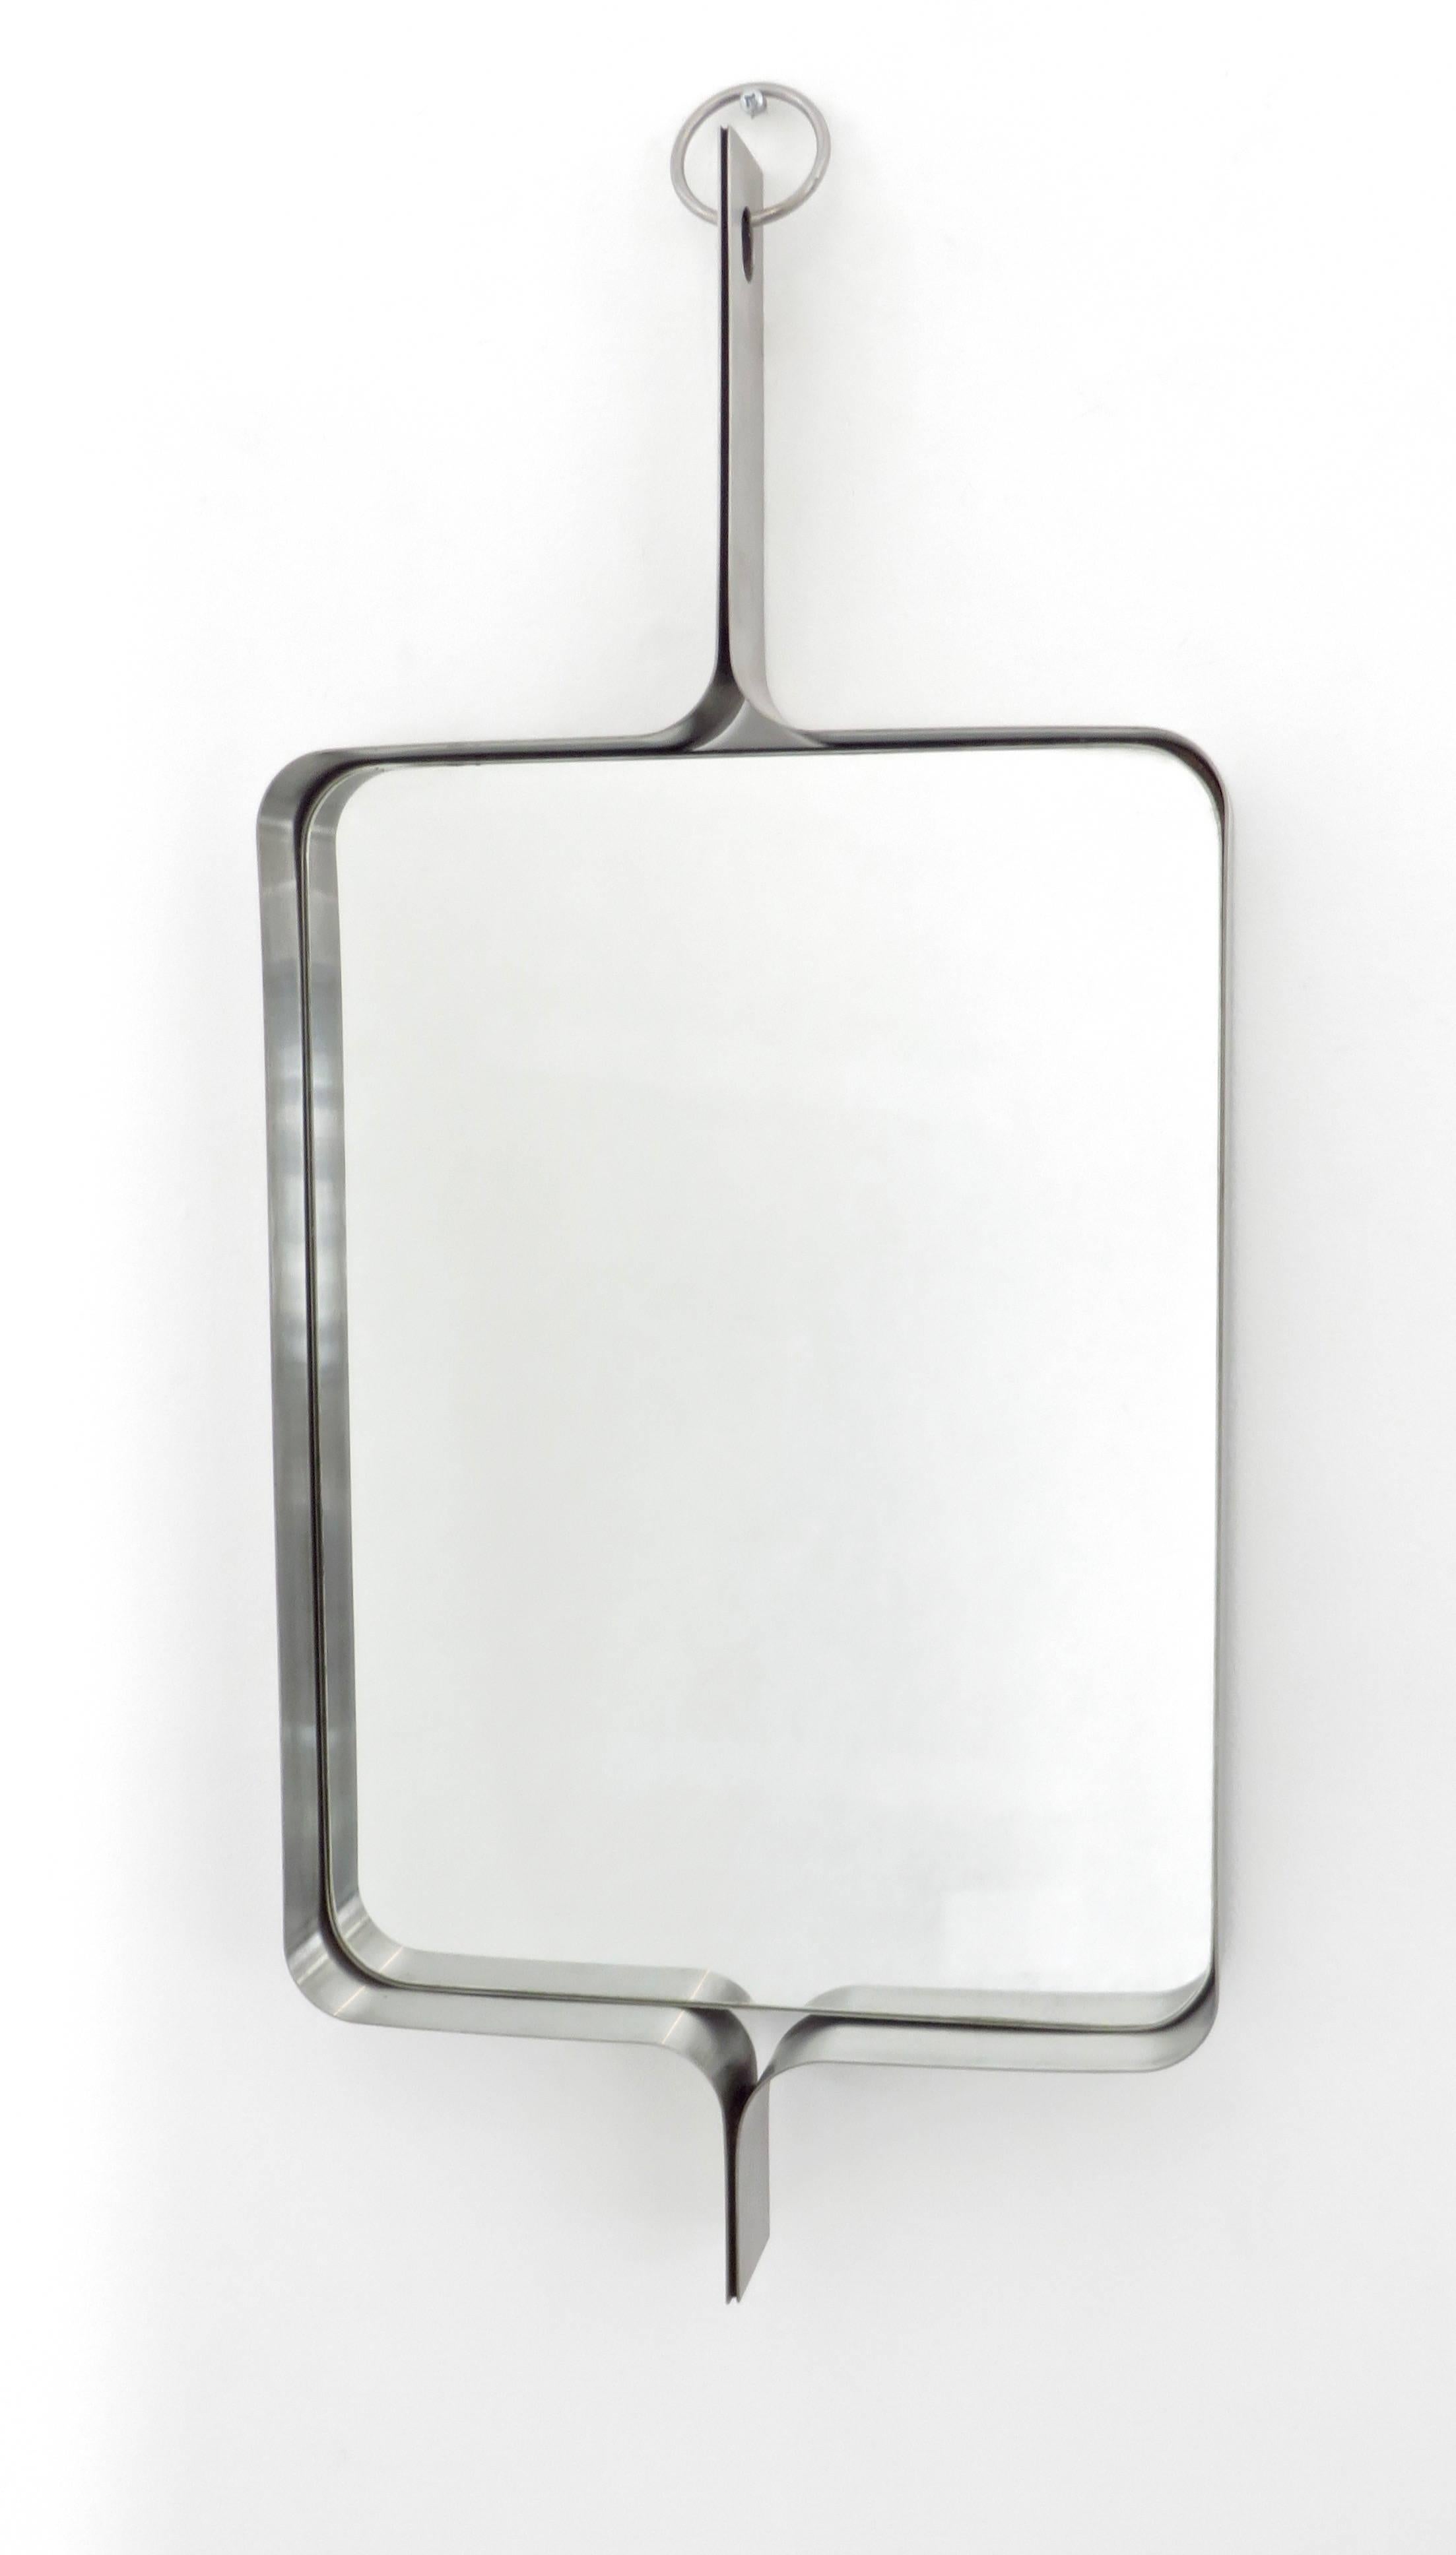 Late 20th Century Xavier-Feal French Rectangular Brushed Stainless Steel Wall Mirror, circa 1970